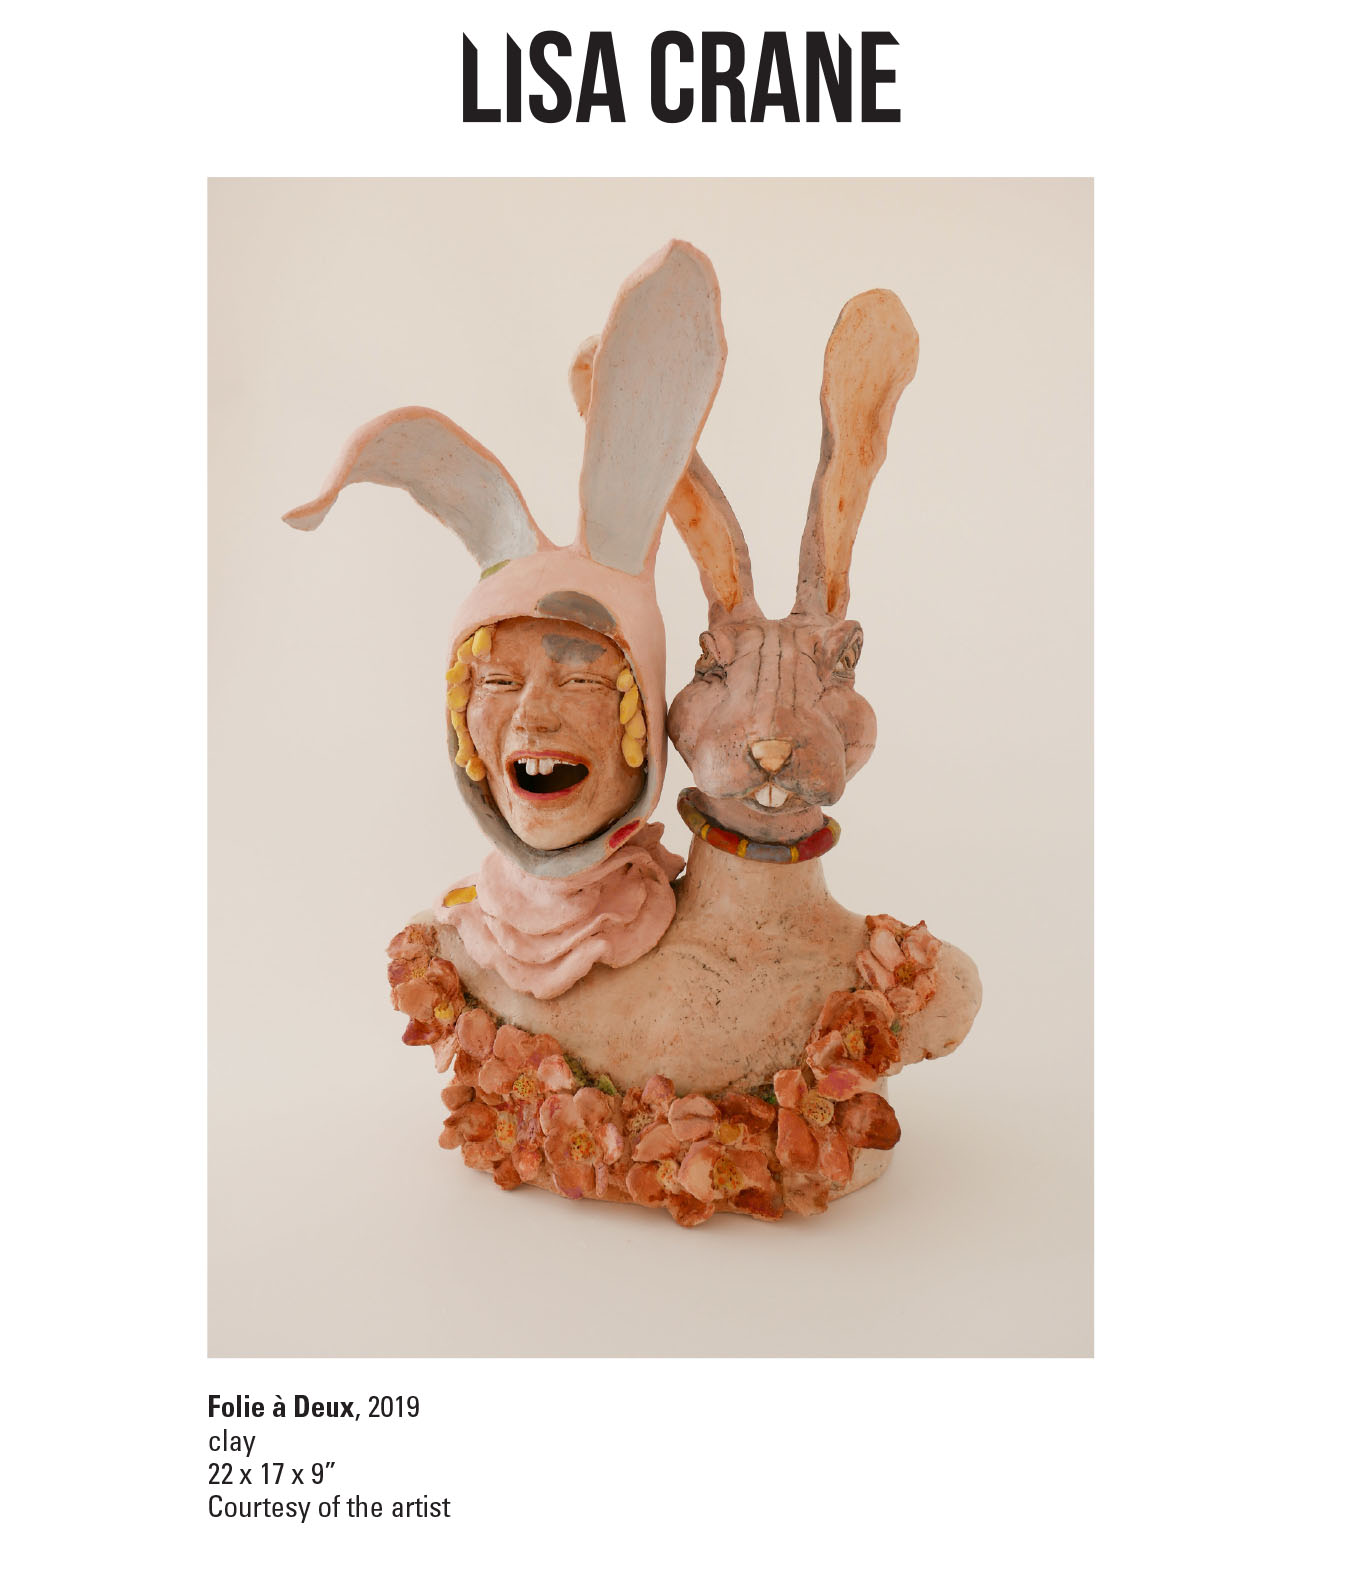 Lisa Crane, Folie a Deux, 2018. Clay. 22 x 17 x 9“ Courtesy of the artist. A sculpture of a woman in a bunny hat next to a rabbit head sculpture